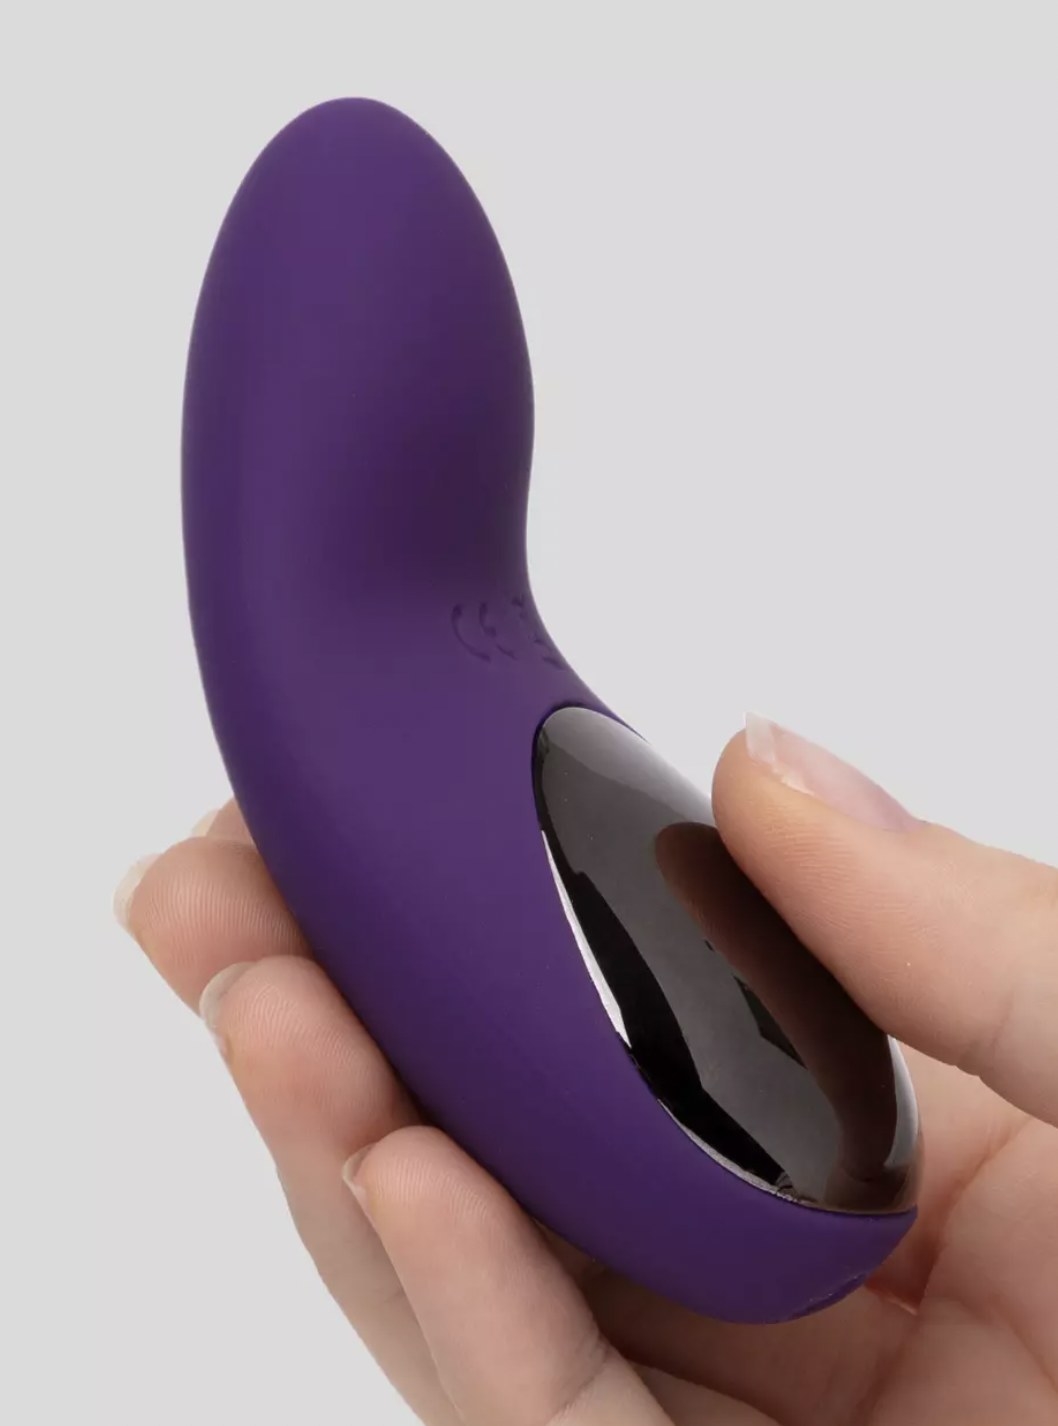 Someone holding the purple vibrator in palm